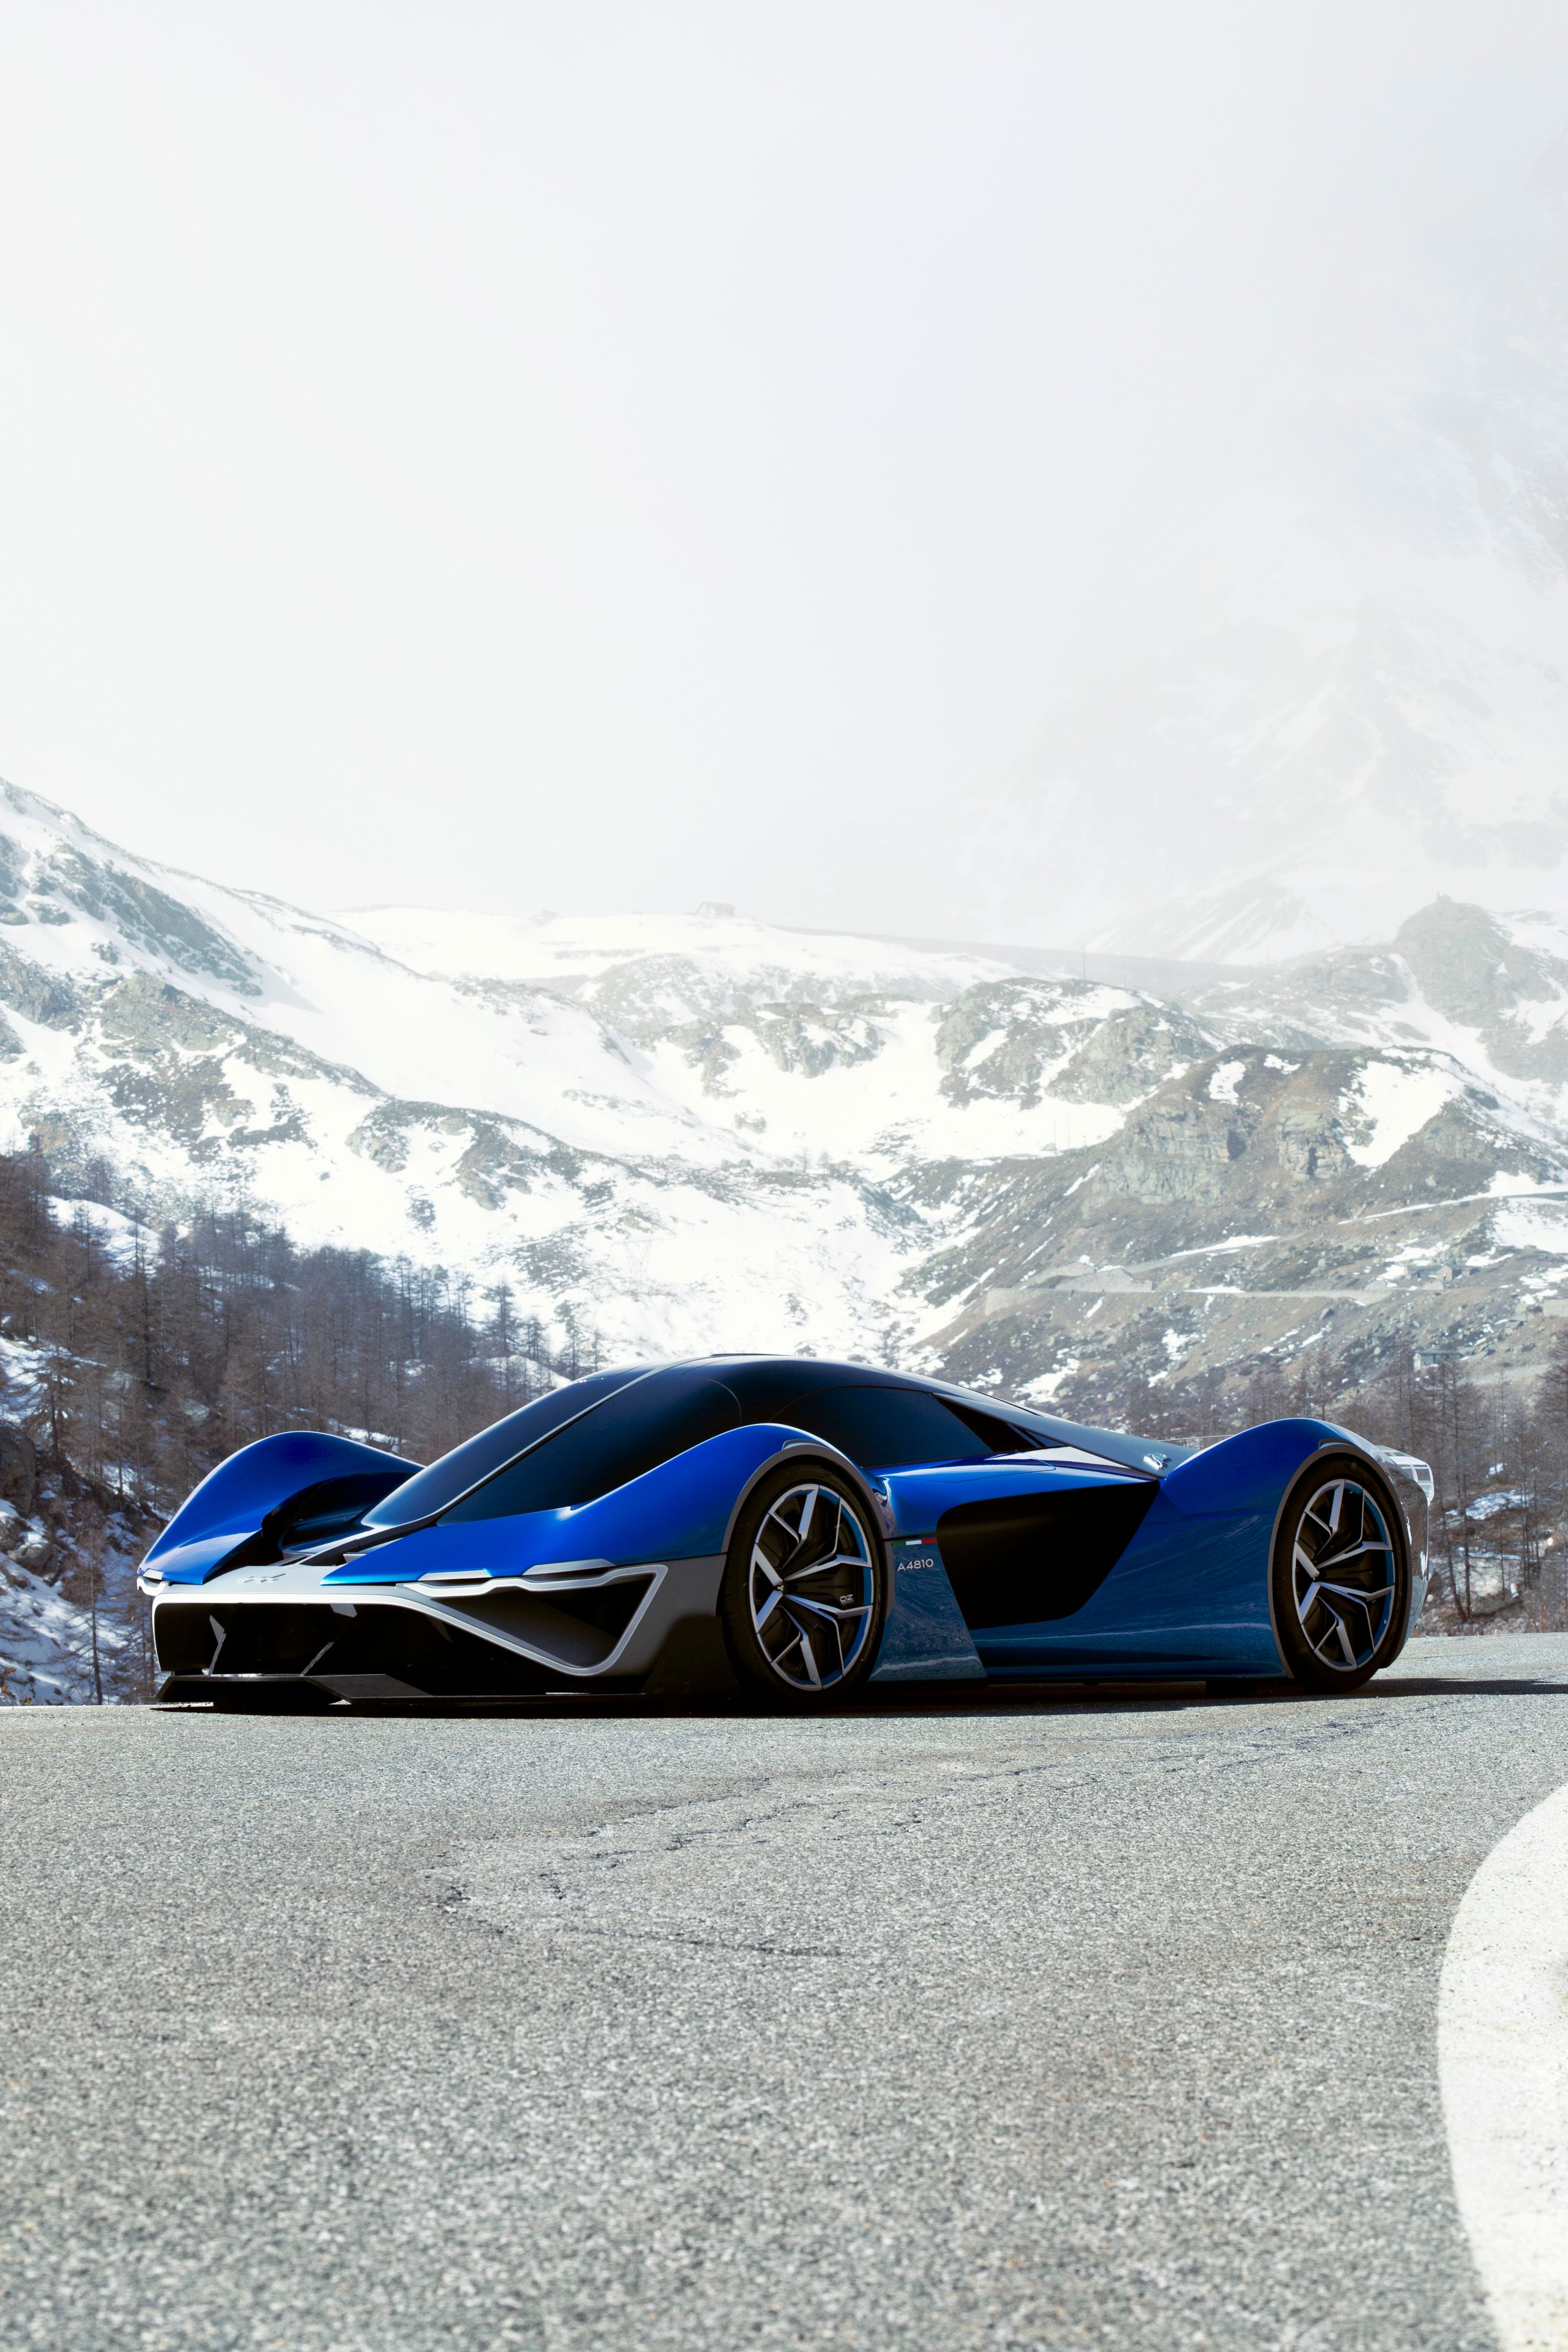 2022 Alpine A4810 Project By IED